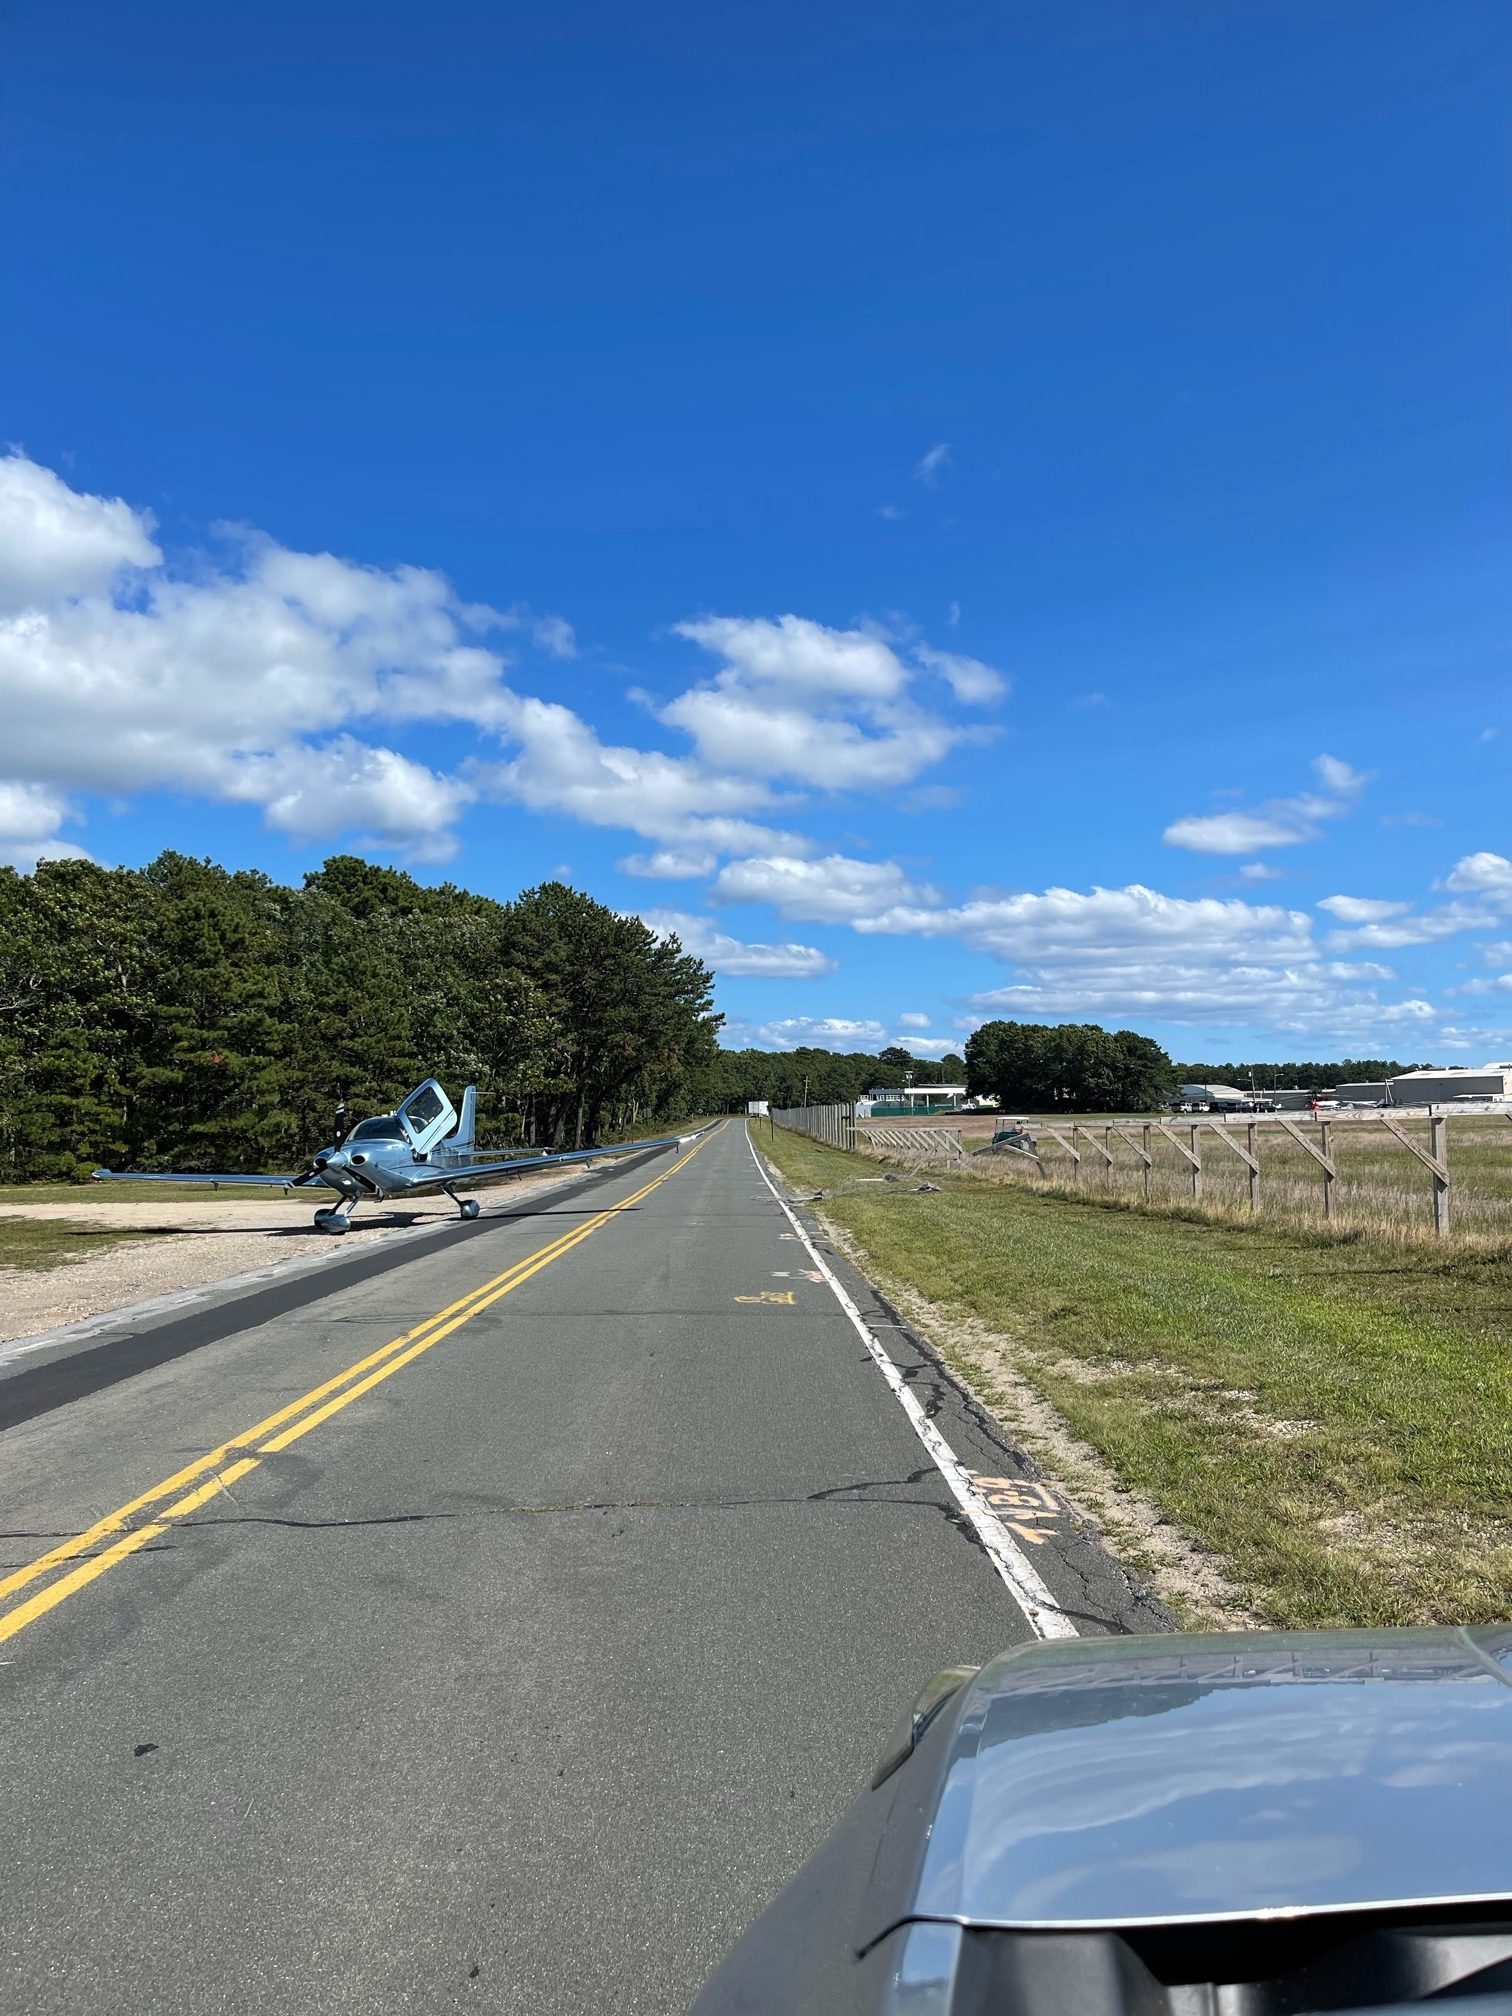 A small plane overshot the runway at East Hampton Airport.